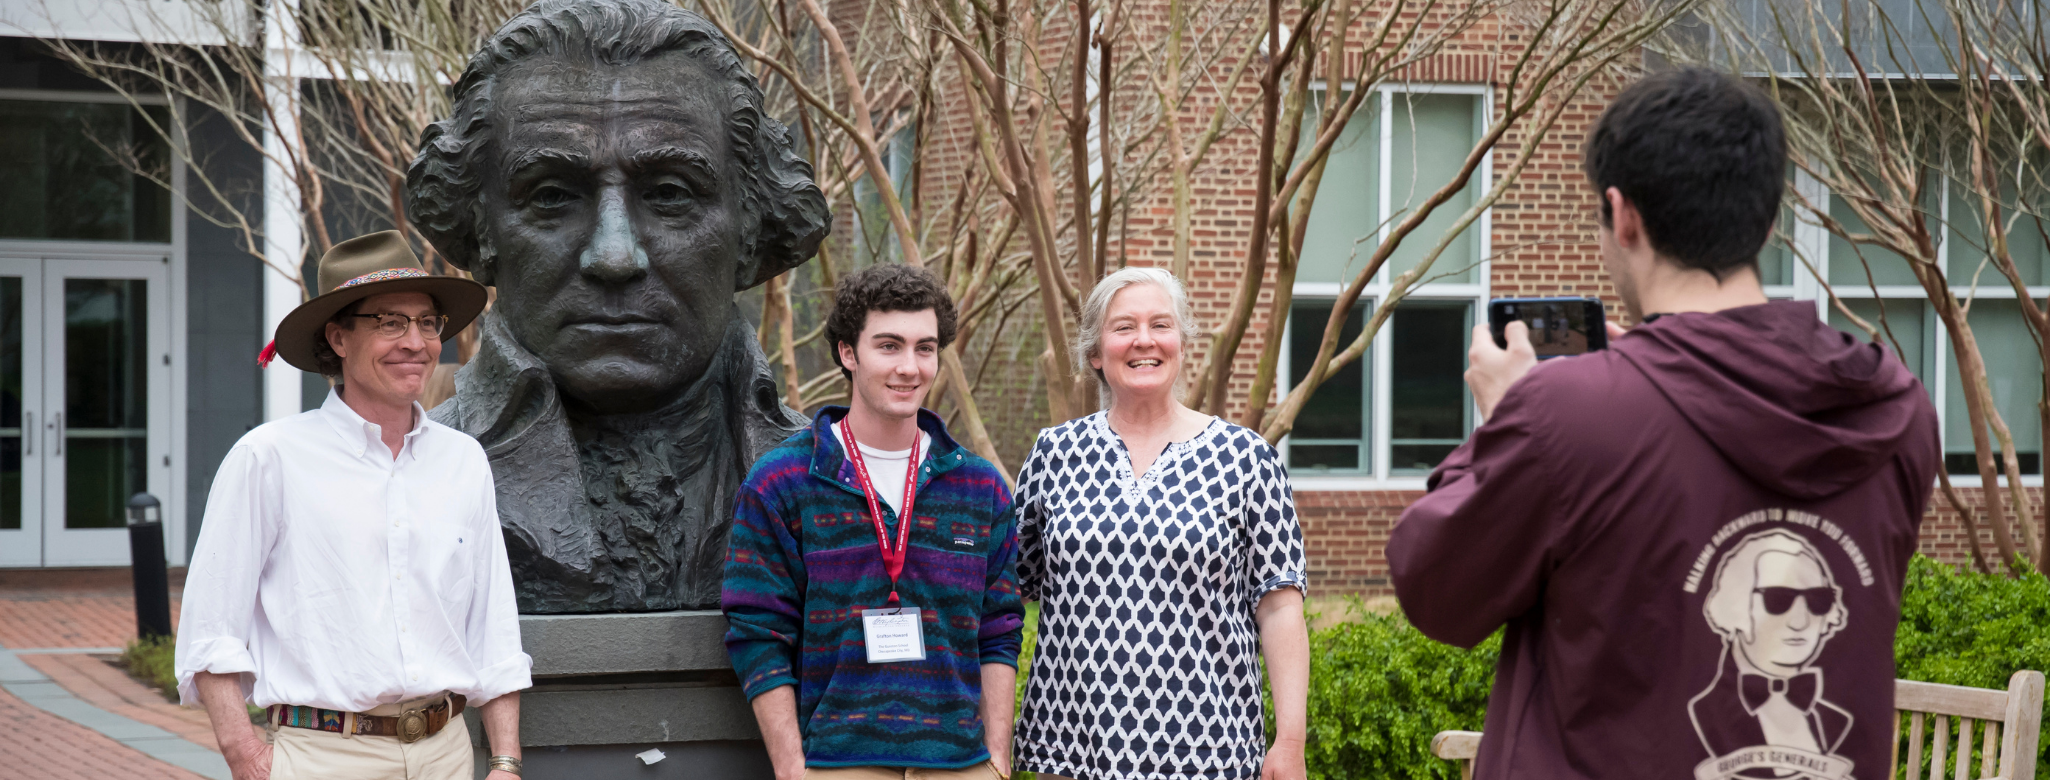 parents and child posing with the george washington statue at admitted students day